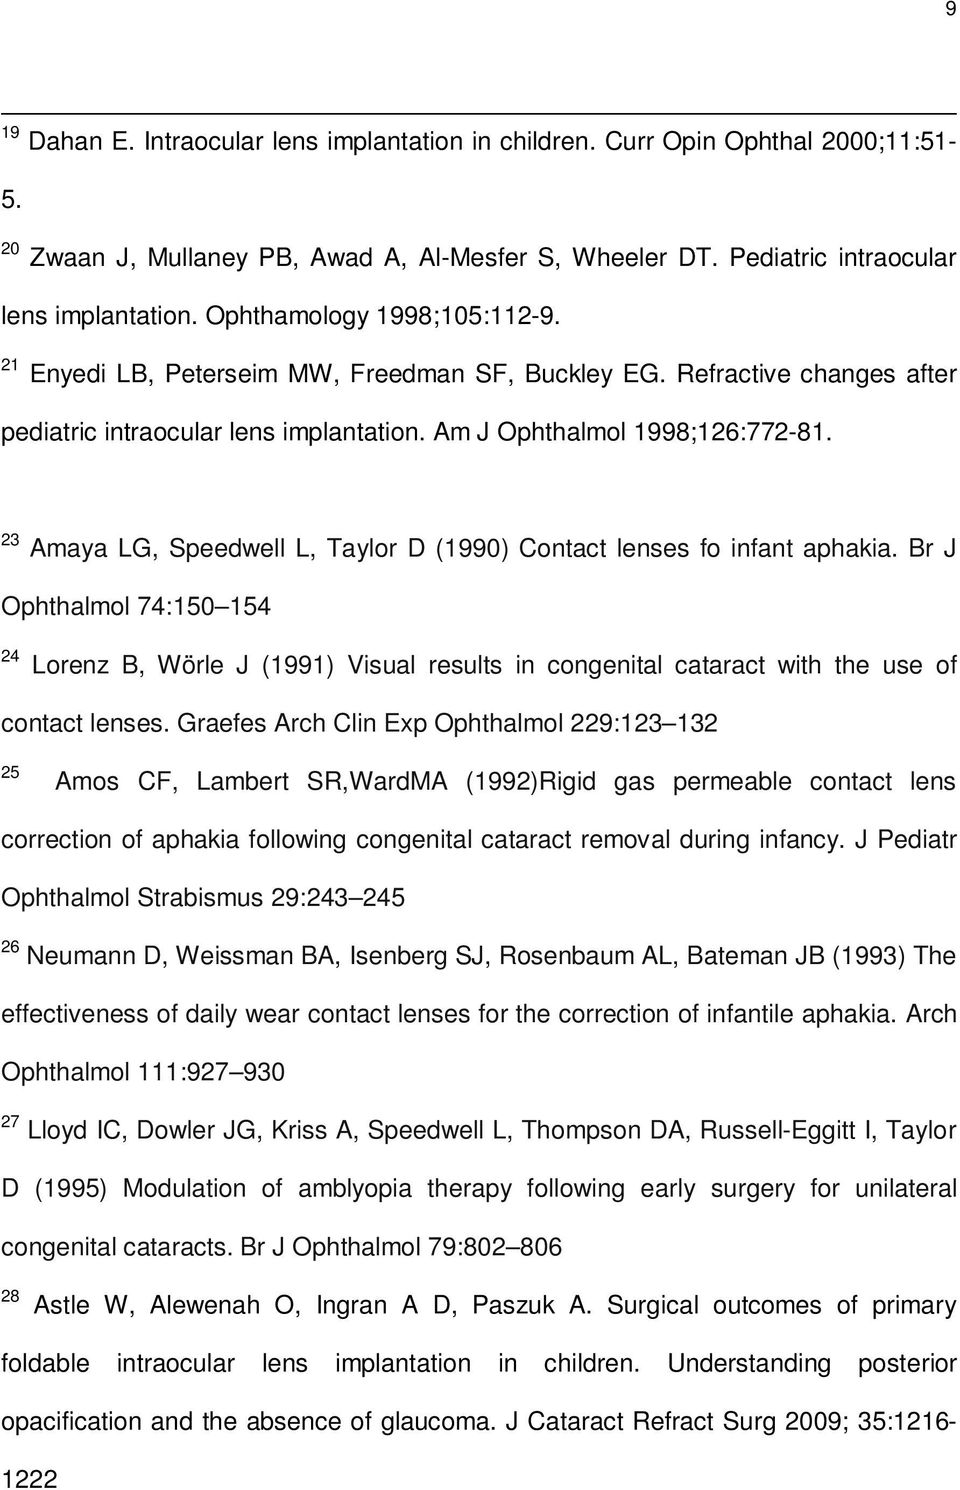 23 Amaya LG, Speedwell L, Taylor D (1990) Contact lenses fo infant aphakia. Br J Ophthalmol 74:150 154 24 Lorenz B, Wörle J (1991) Visual results in congenital cataract with the use of contact lenses.